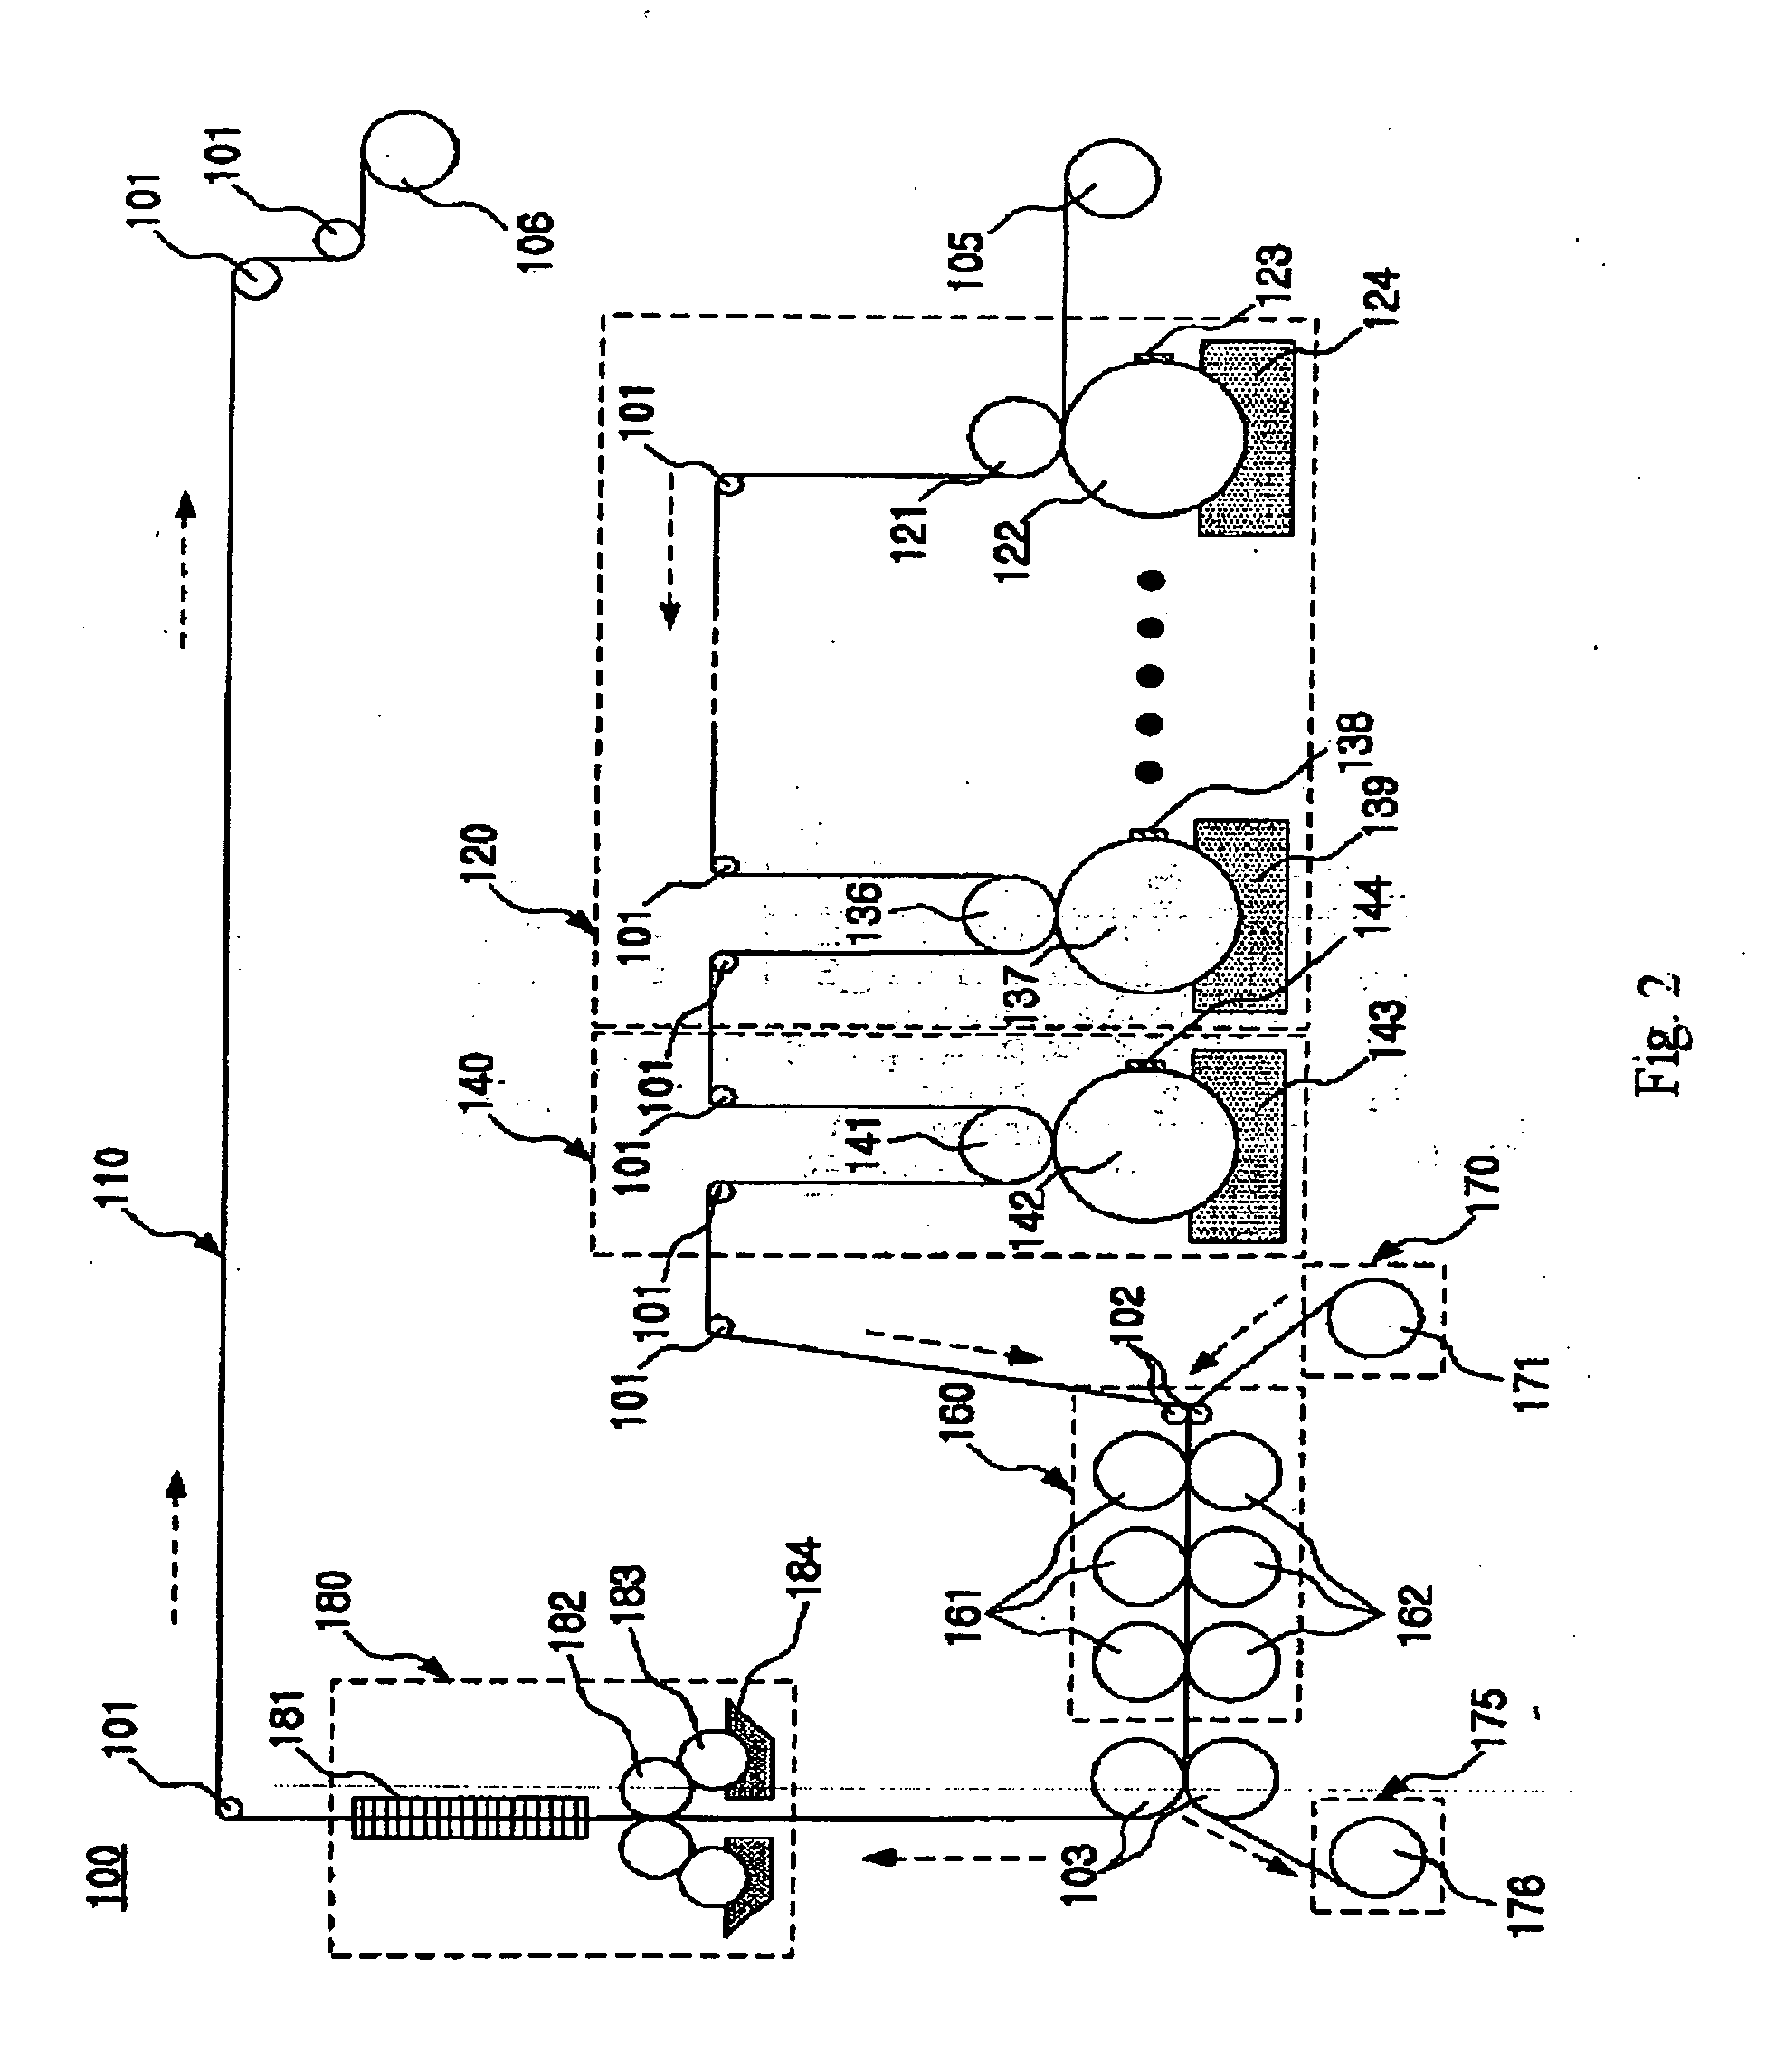 Method and apparatus for transfer printing, and printed articles manufactured by same